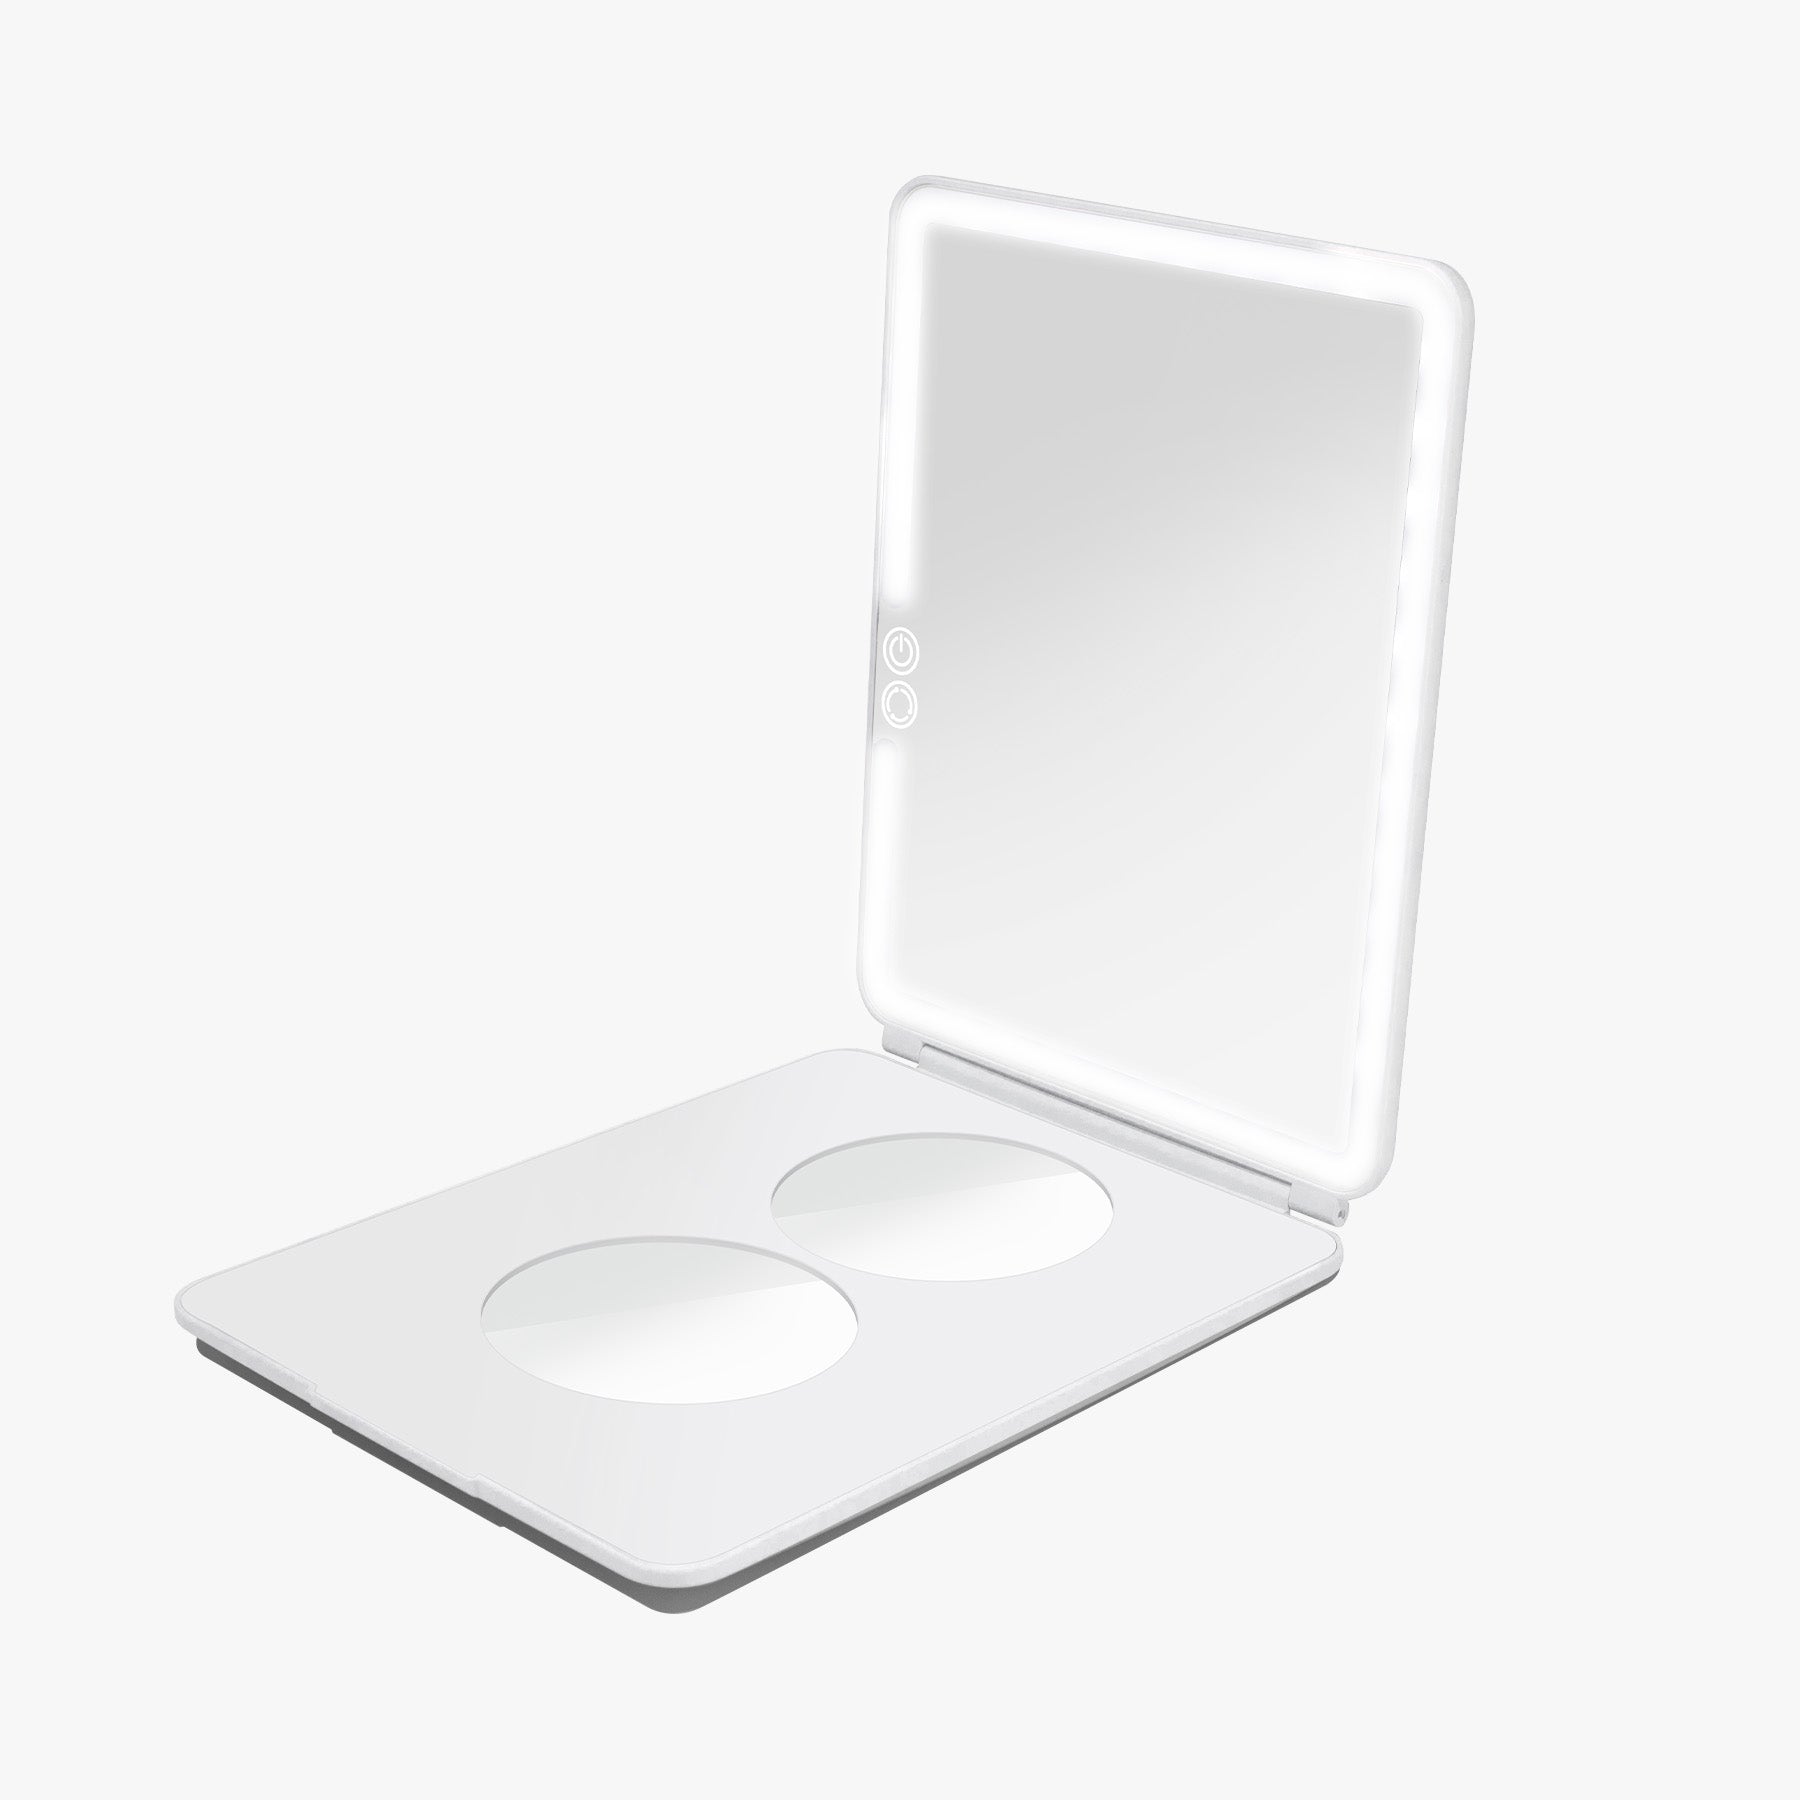 Mini Pose 2.0 | LED Mirror on The Go. by Vanity Planet